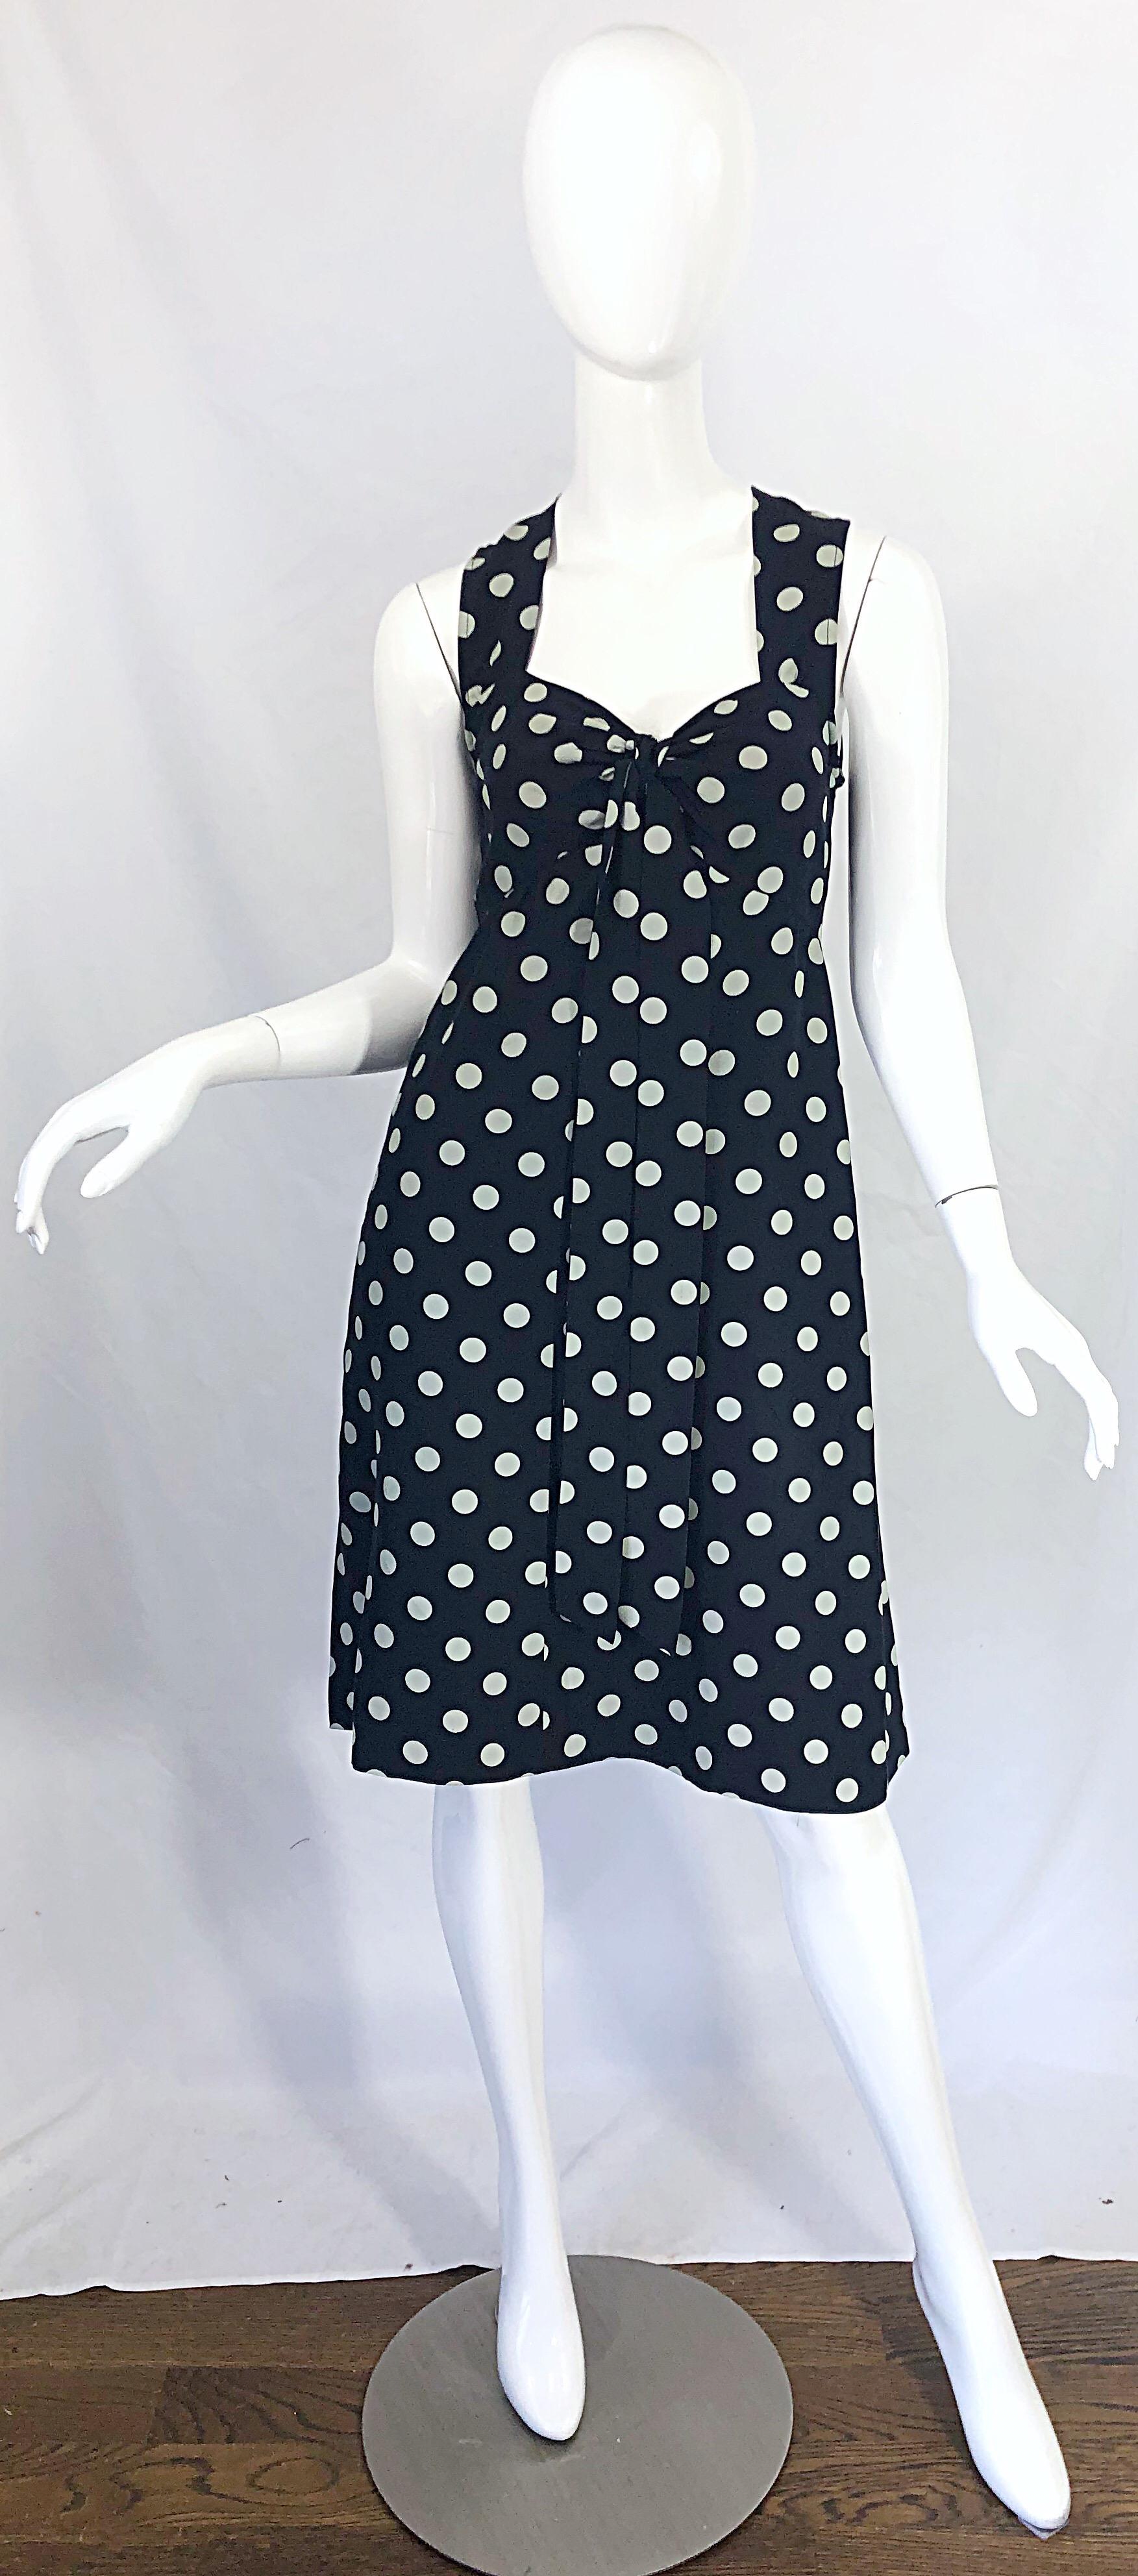 Chic early 1980s YVES SAINT LAURENT Rive Gauche navy blue and white polka dot silk sleeveless dress ! Features a tailored bodice with a flowy skirt. Tie details at center bust that fall to the hem. Hidden zipper up the back with hook-and-eye